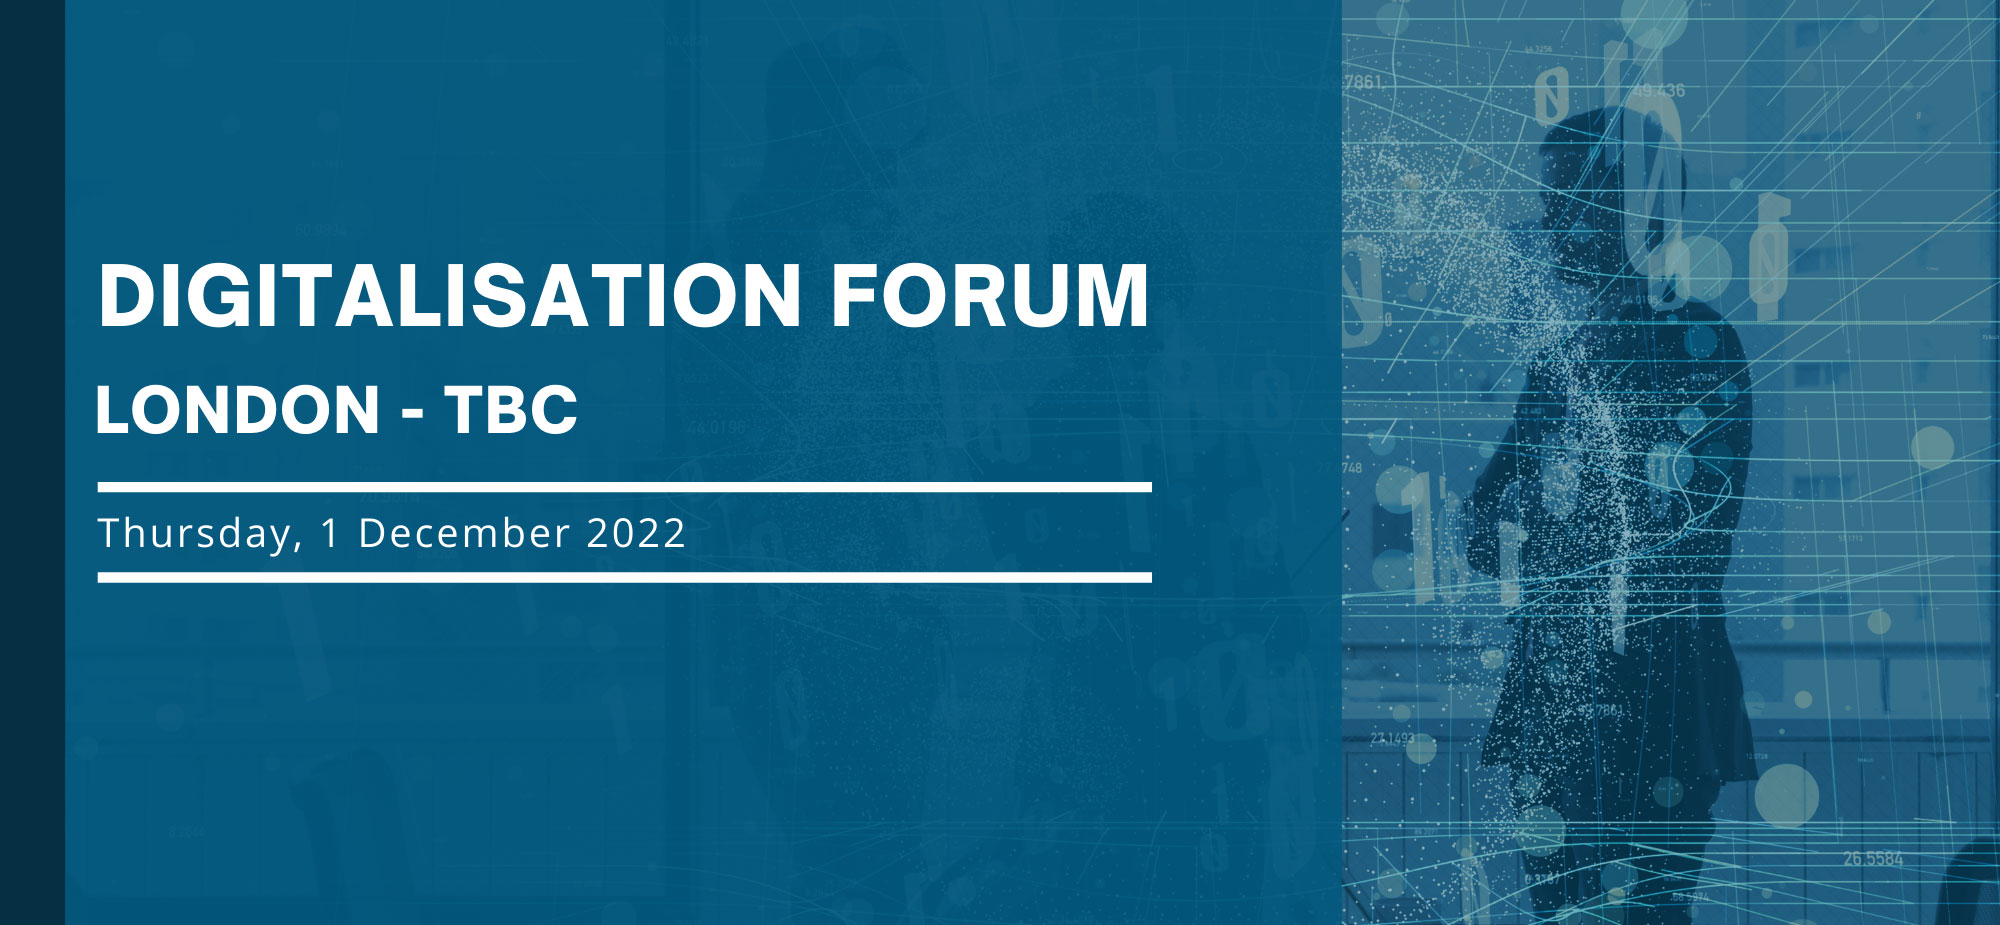 Join us at our Annual Digitalisation Forum